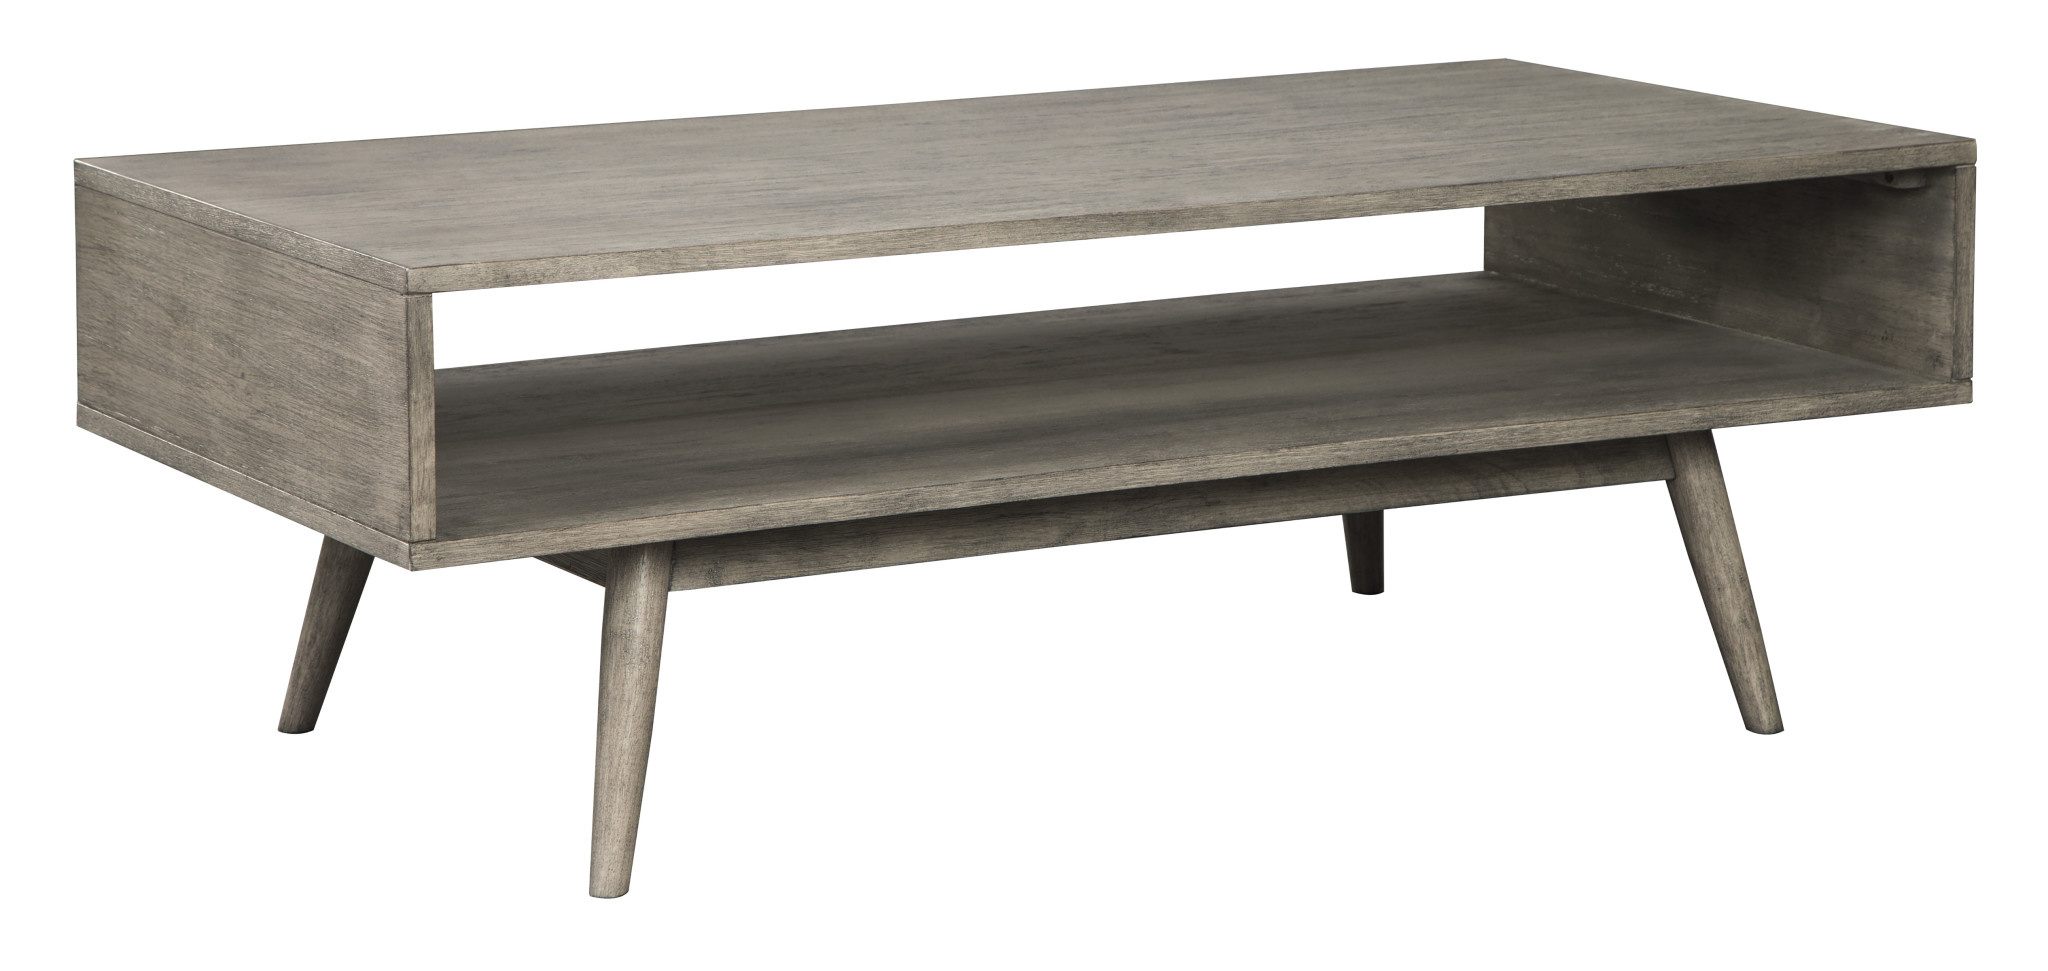 Signature Design "Asterson" Rectangular Cocktail Table- Gray T772-1